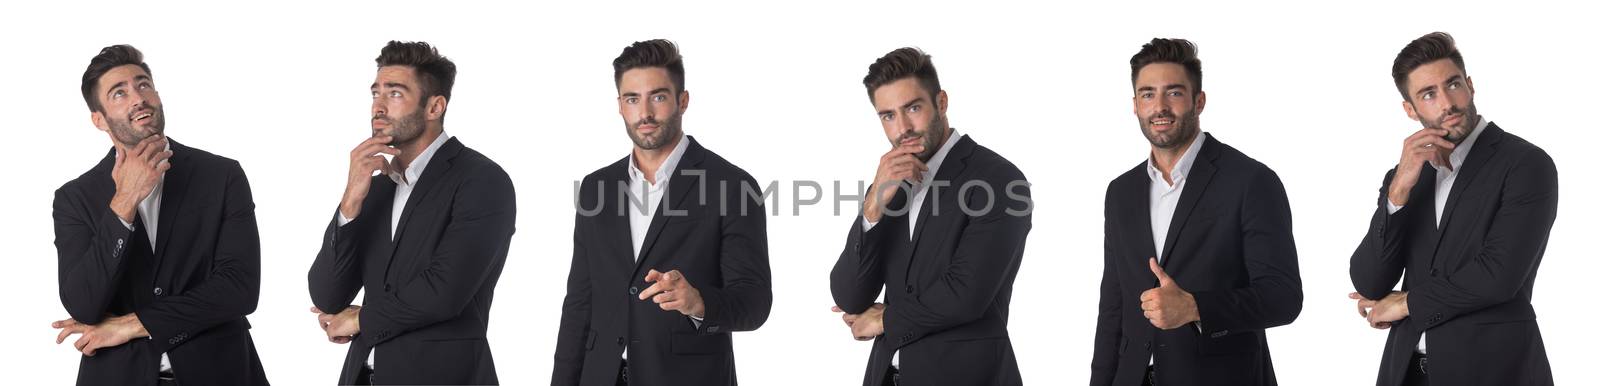 Set of business man portraits by ALotOfPeople